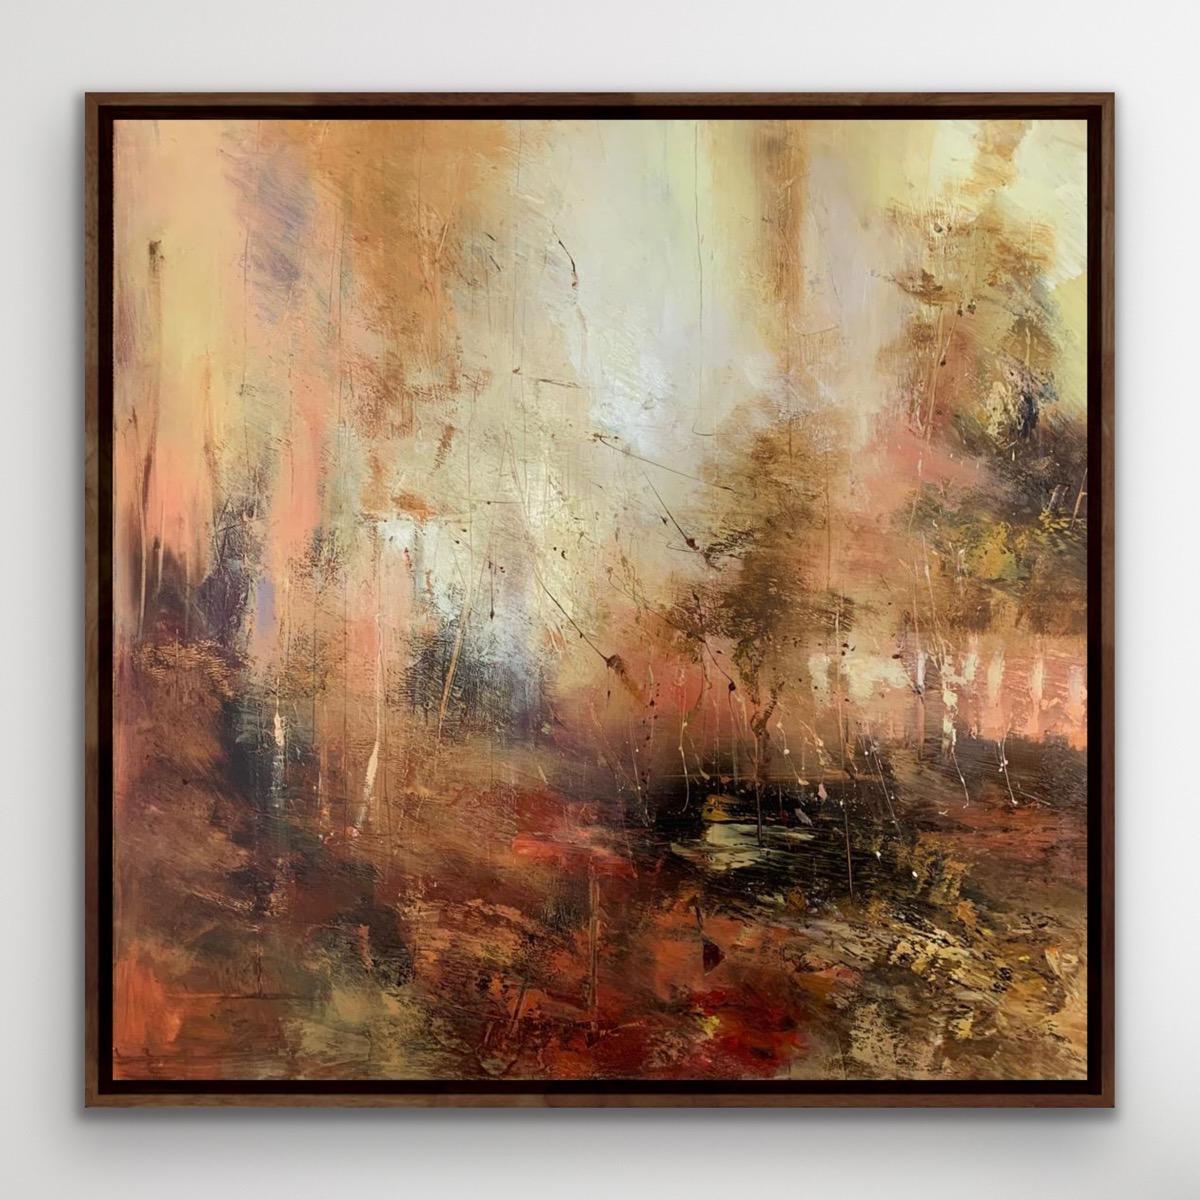 Autumn Mist [2022]

original
Acrylic on Canvas
Image size: H:80 cm x W:80 cm
Complete Size of Unframed Work: H:80 cm x W:80 cm x D:4.5cm
Sold Unframed
Please note that insitu images are purely an indication of how a piece may look

Original